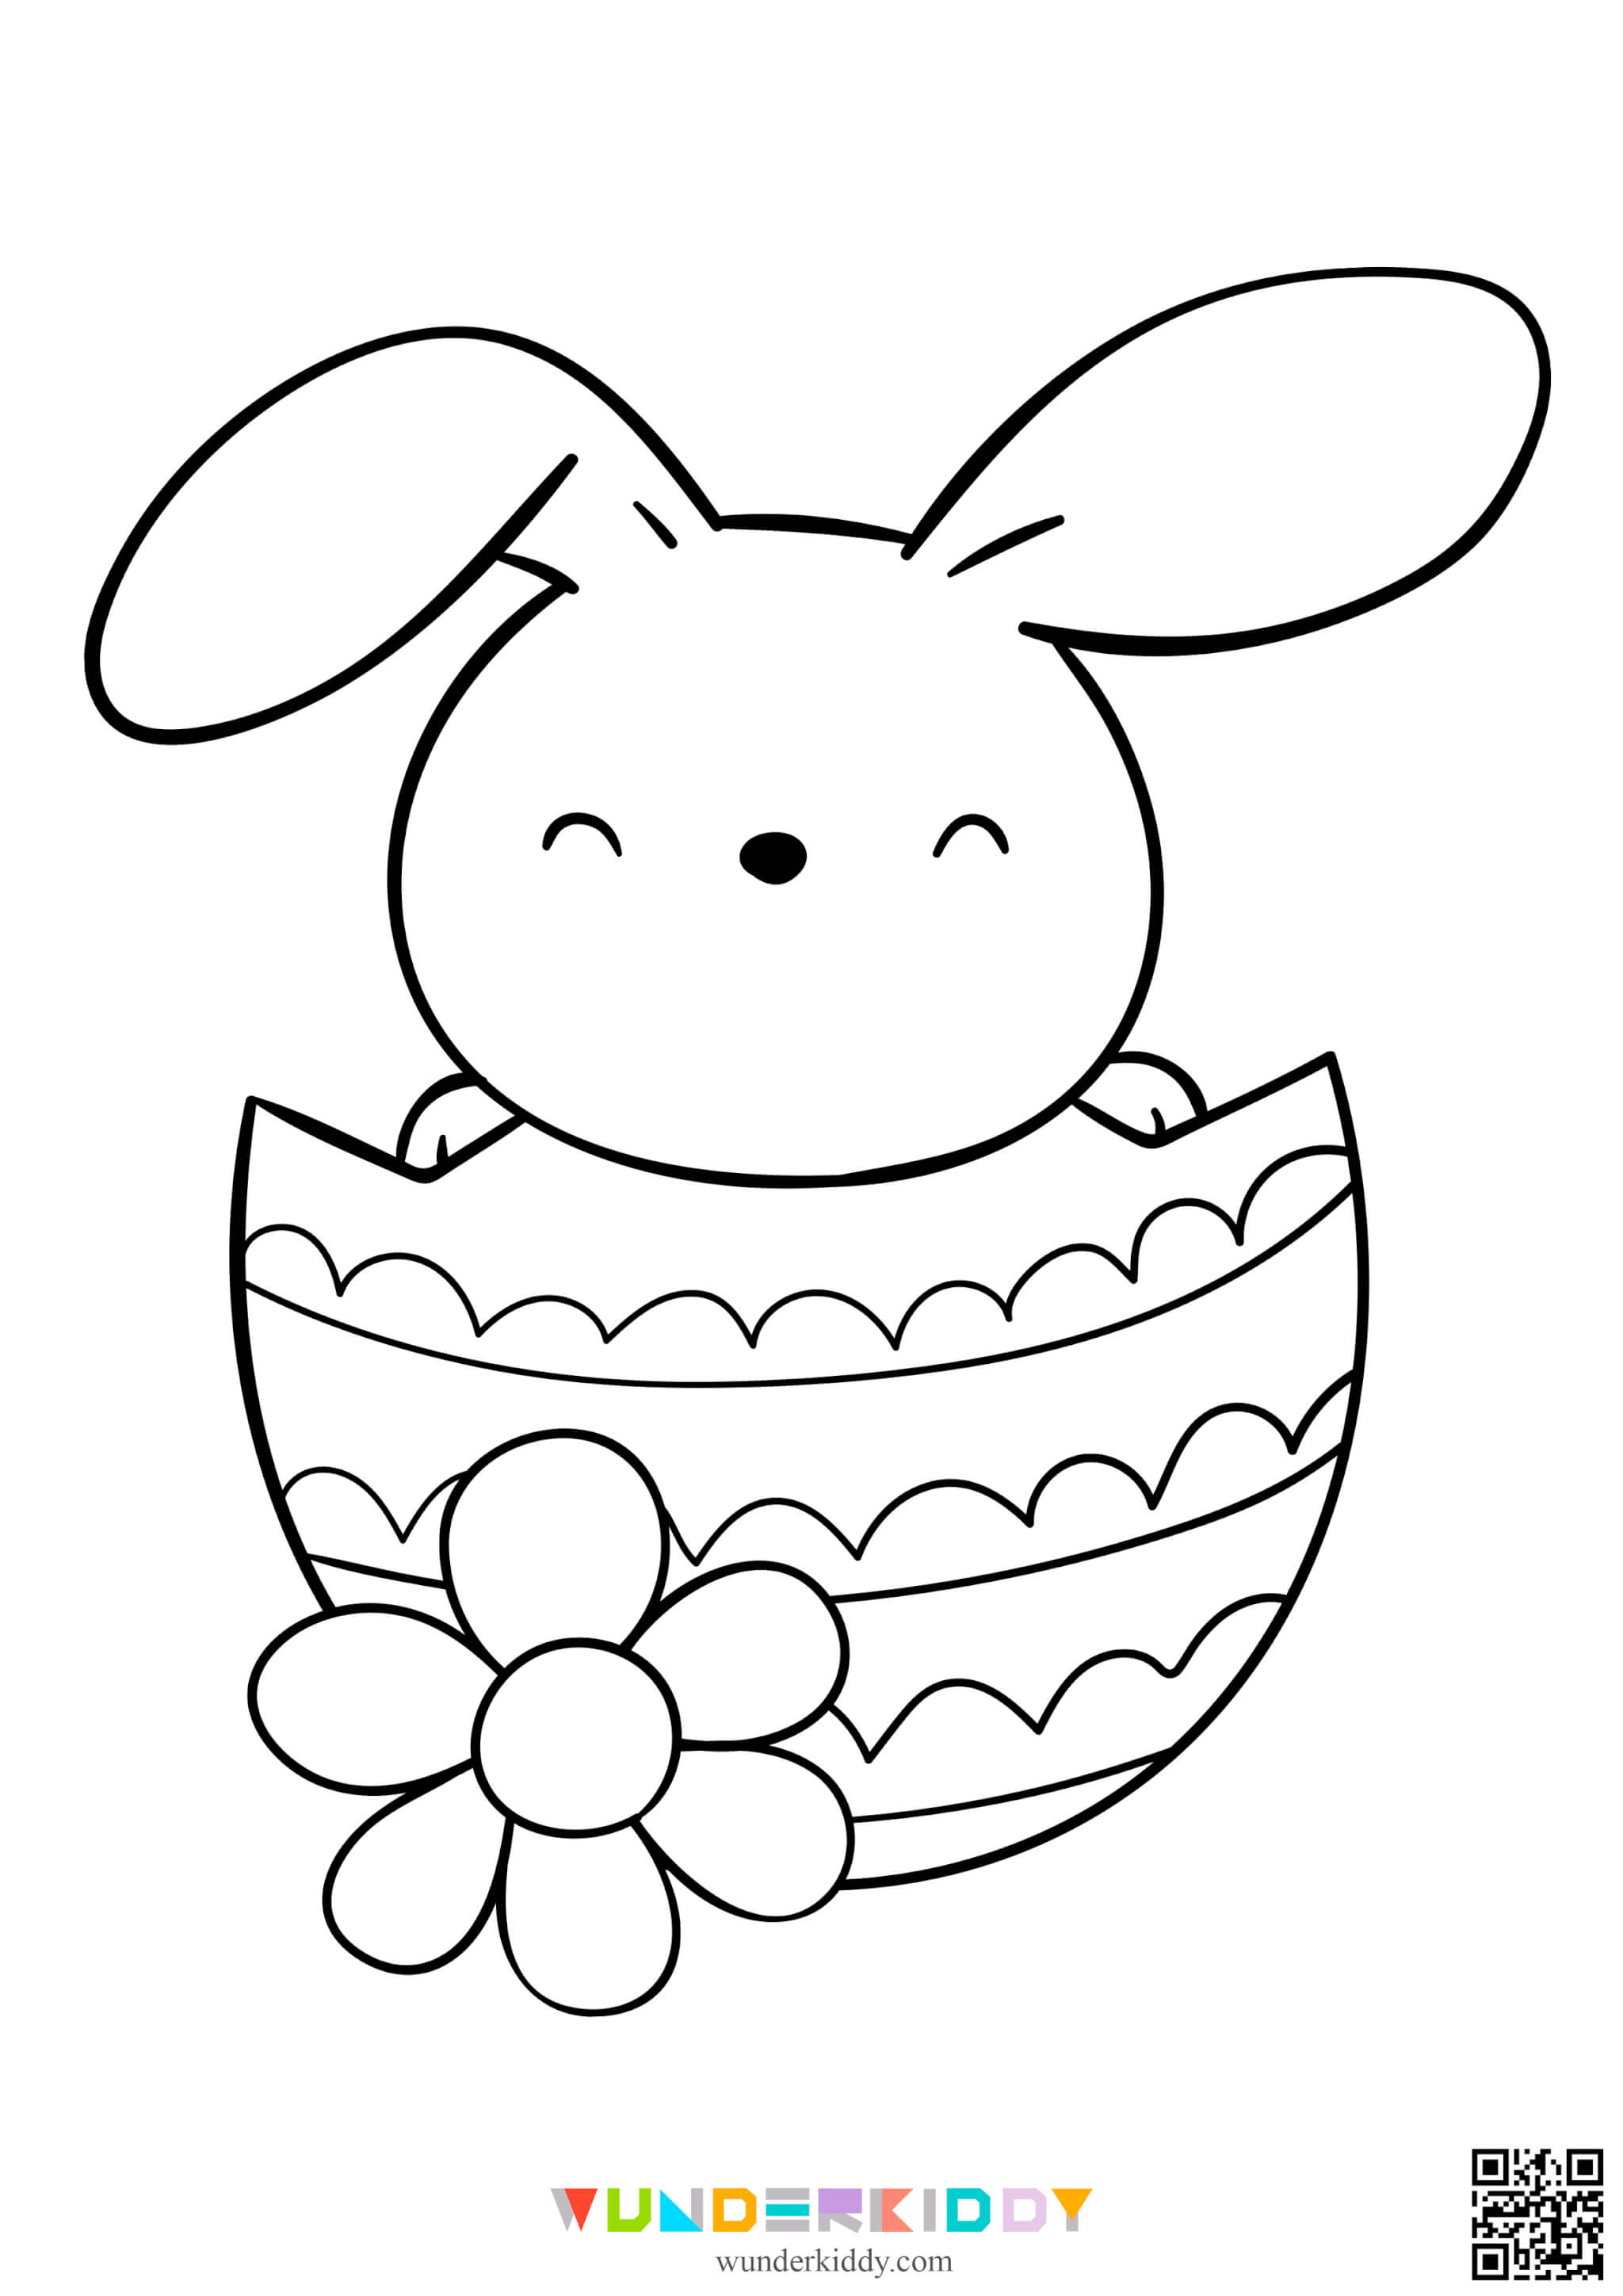 Easter Eggs Coloring Pages - Image 3